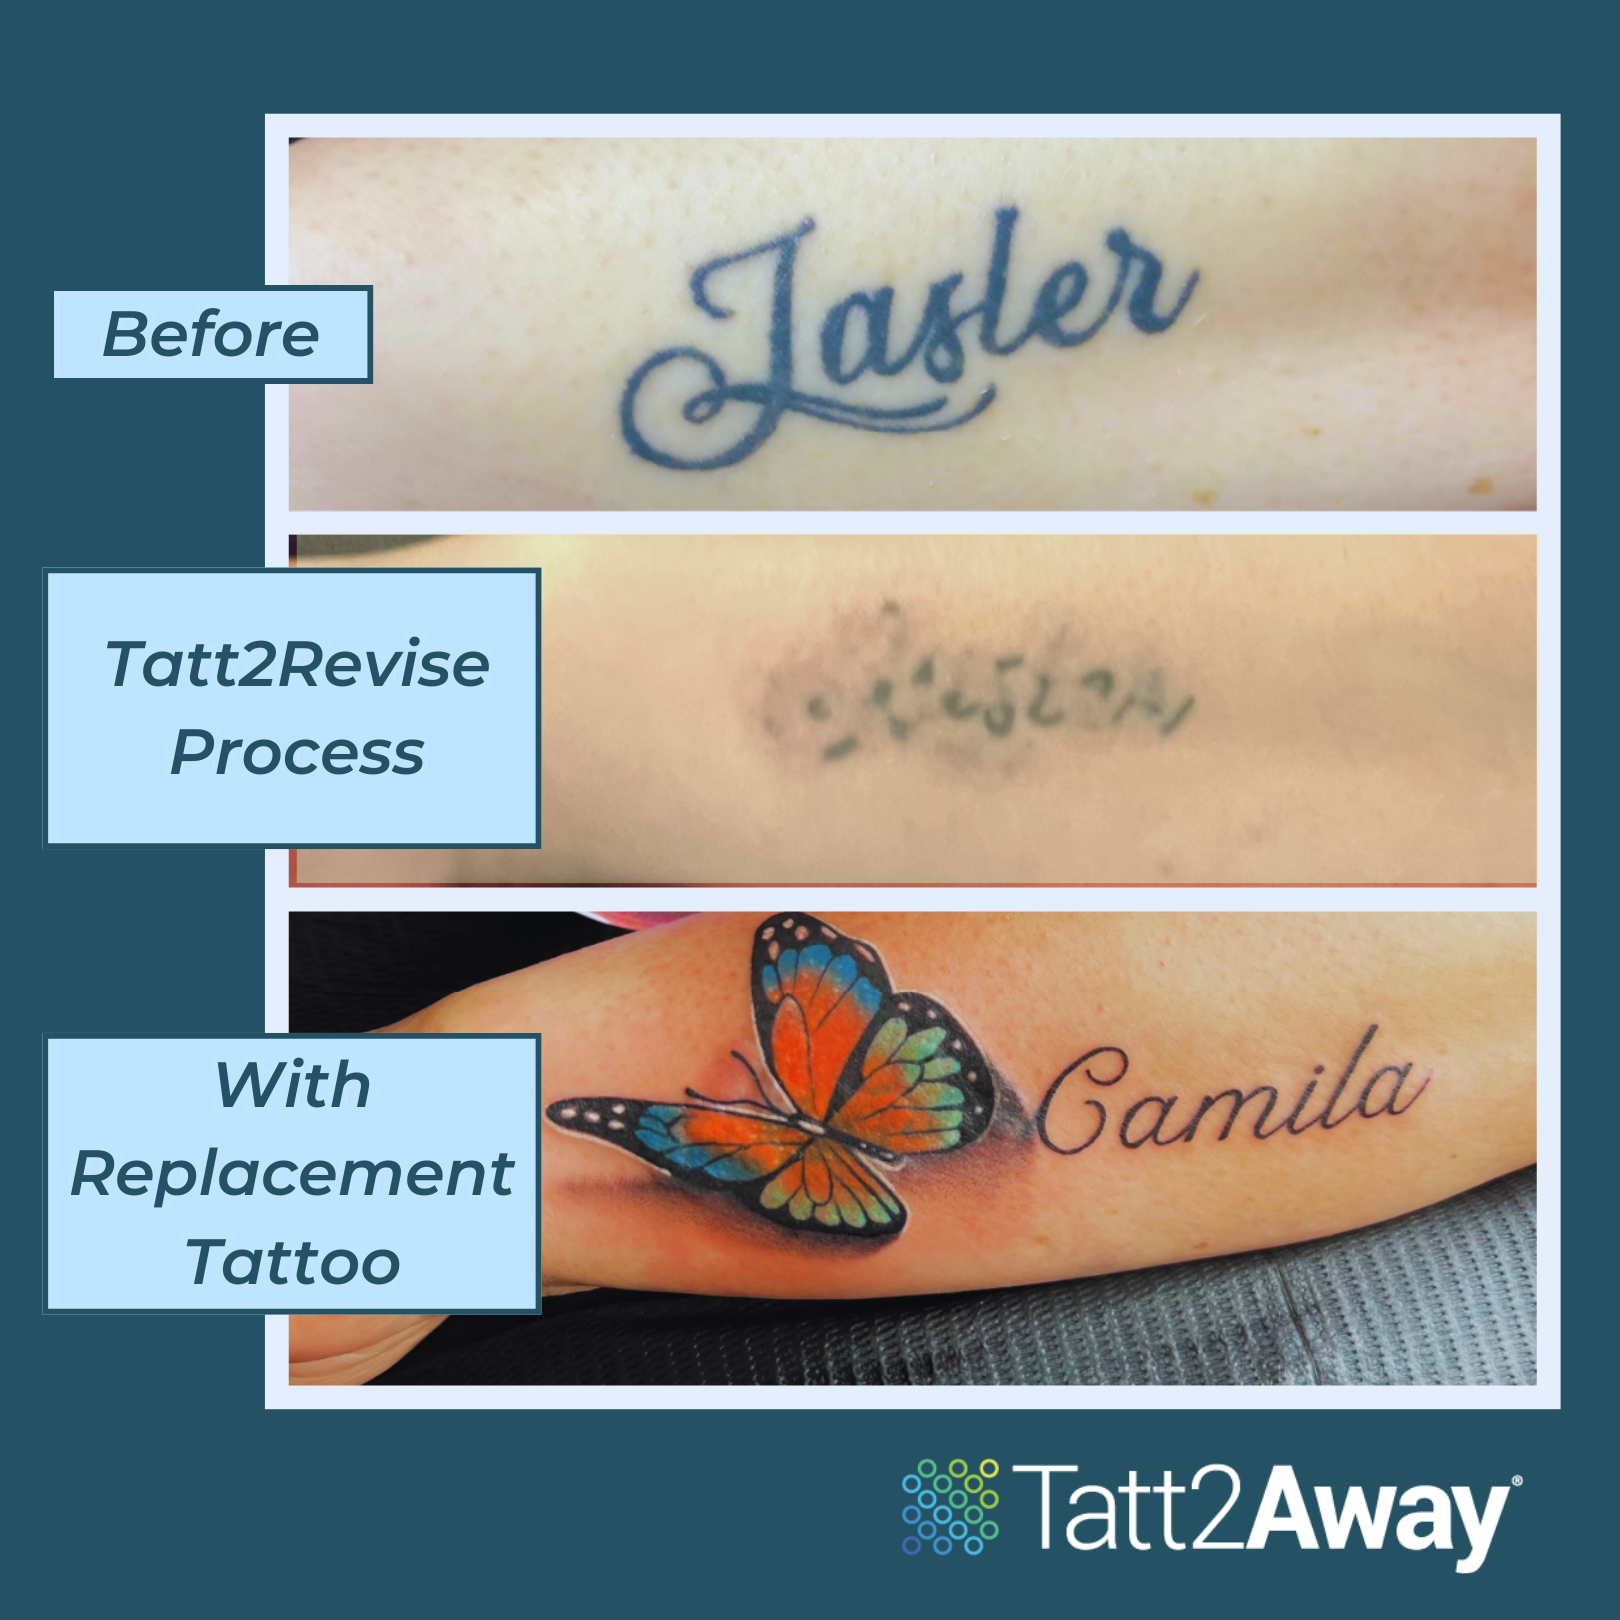 Choose Tatt2Revise and Remove Ink from your tattoo each treatment!